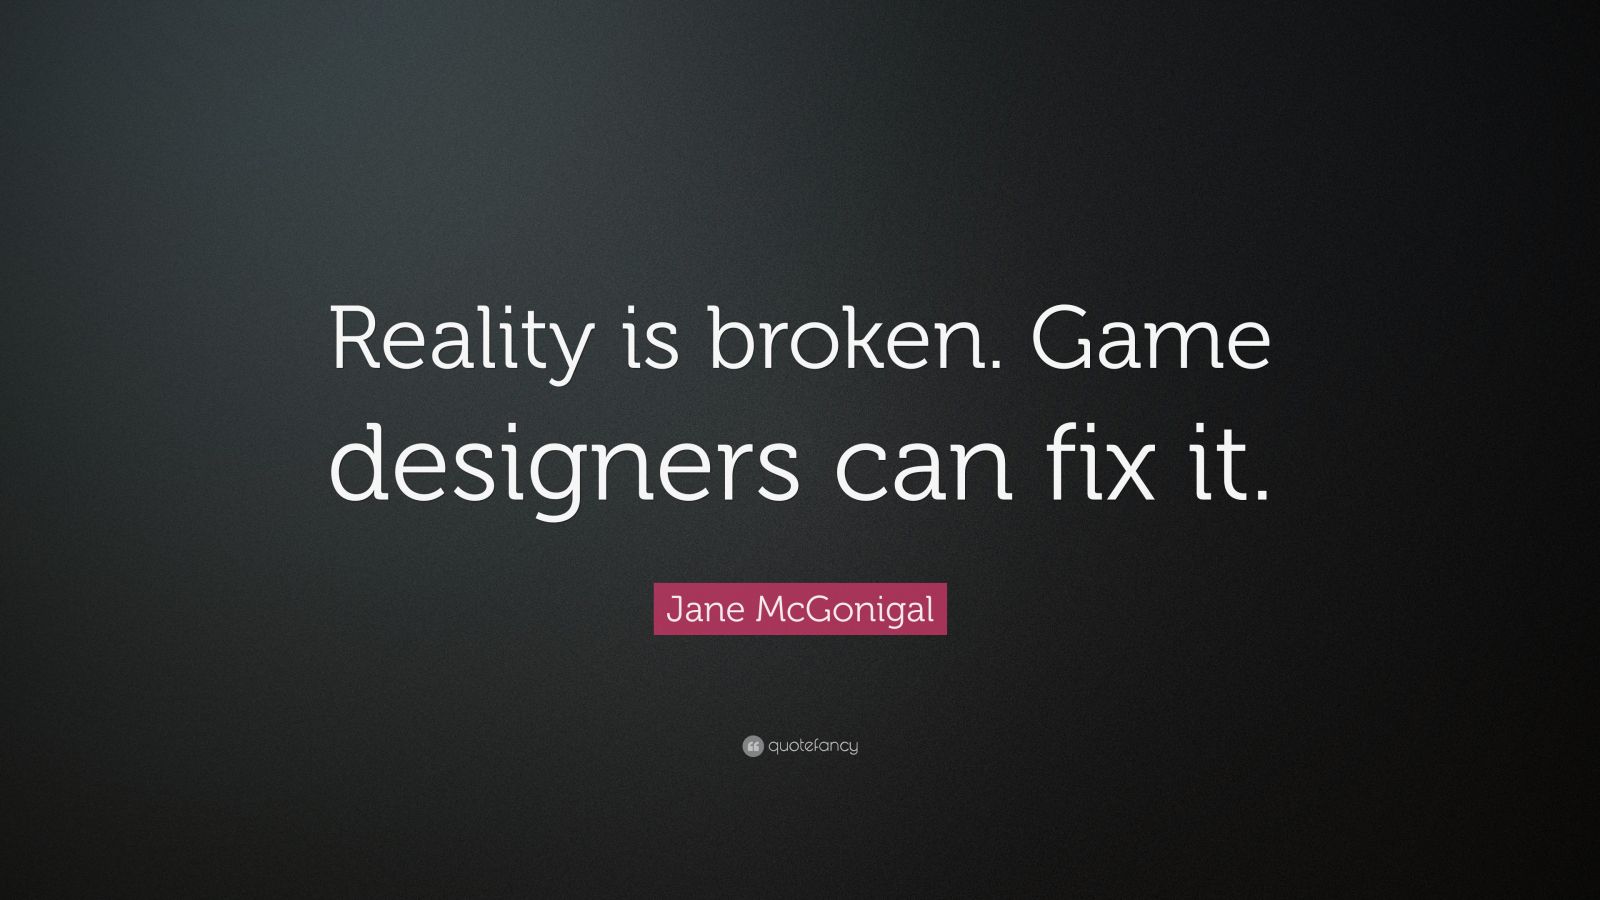 reality is broken by jane mcgonigal